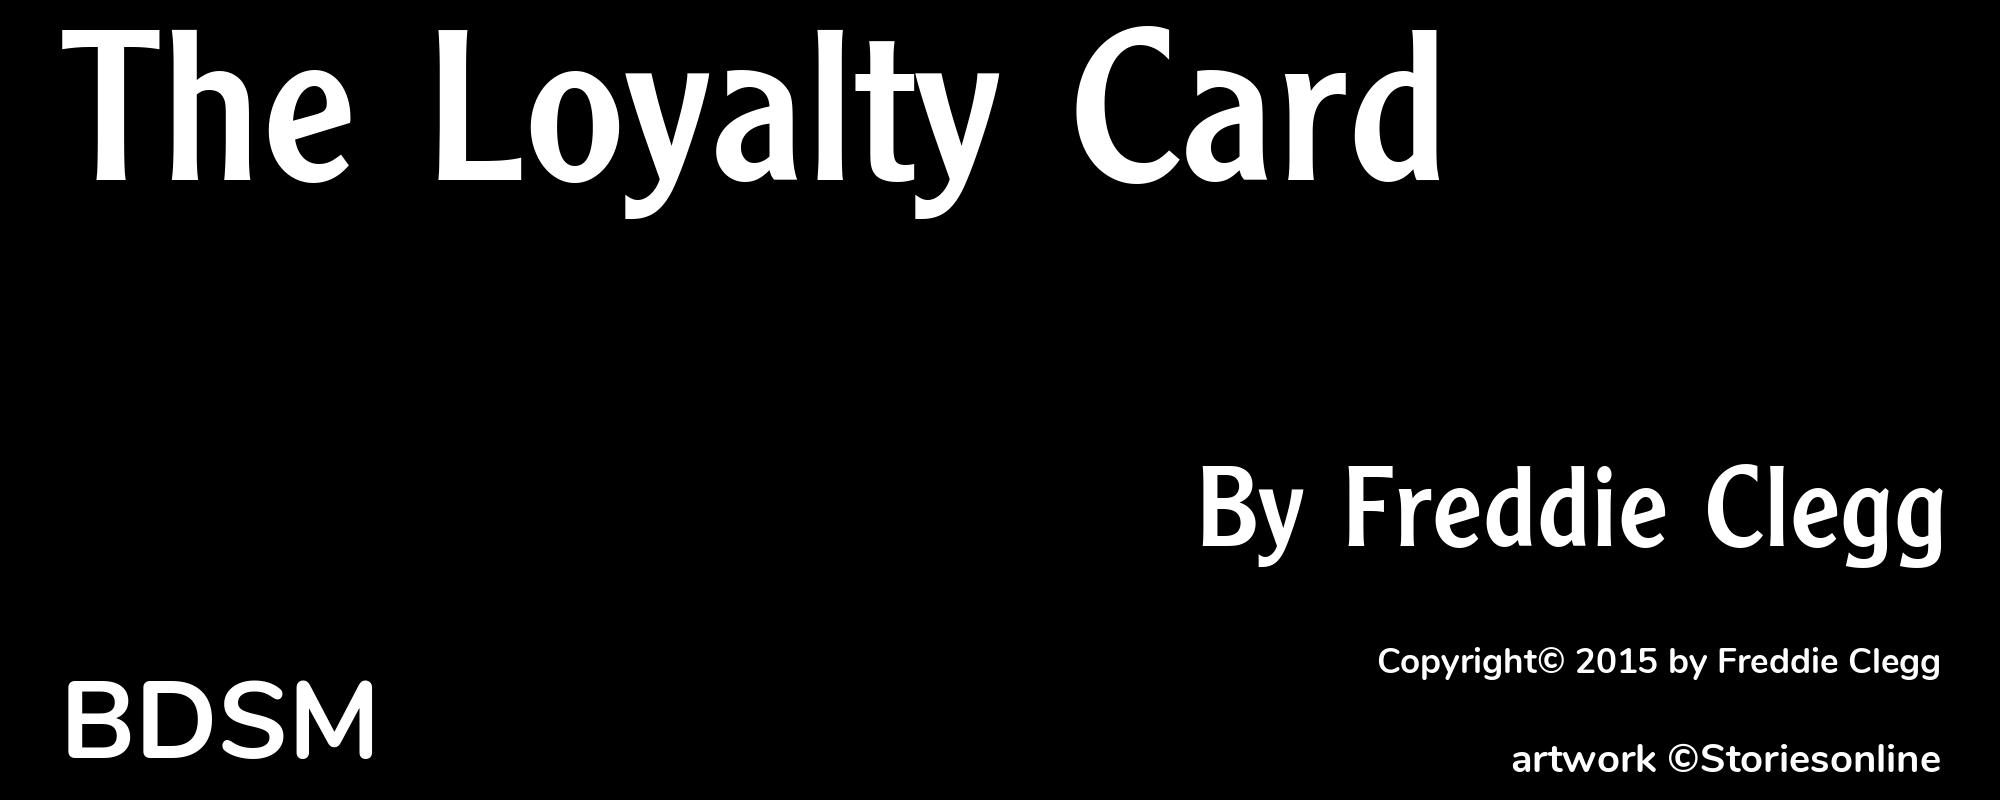 The Loyalty Card - Cover